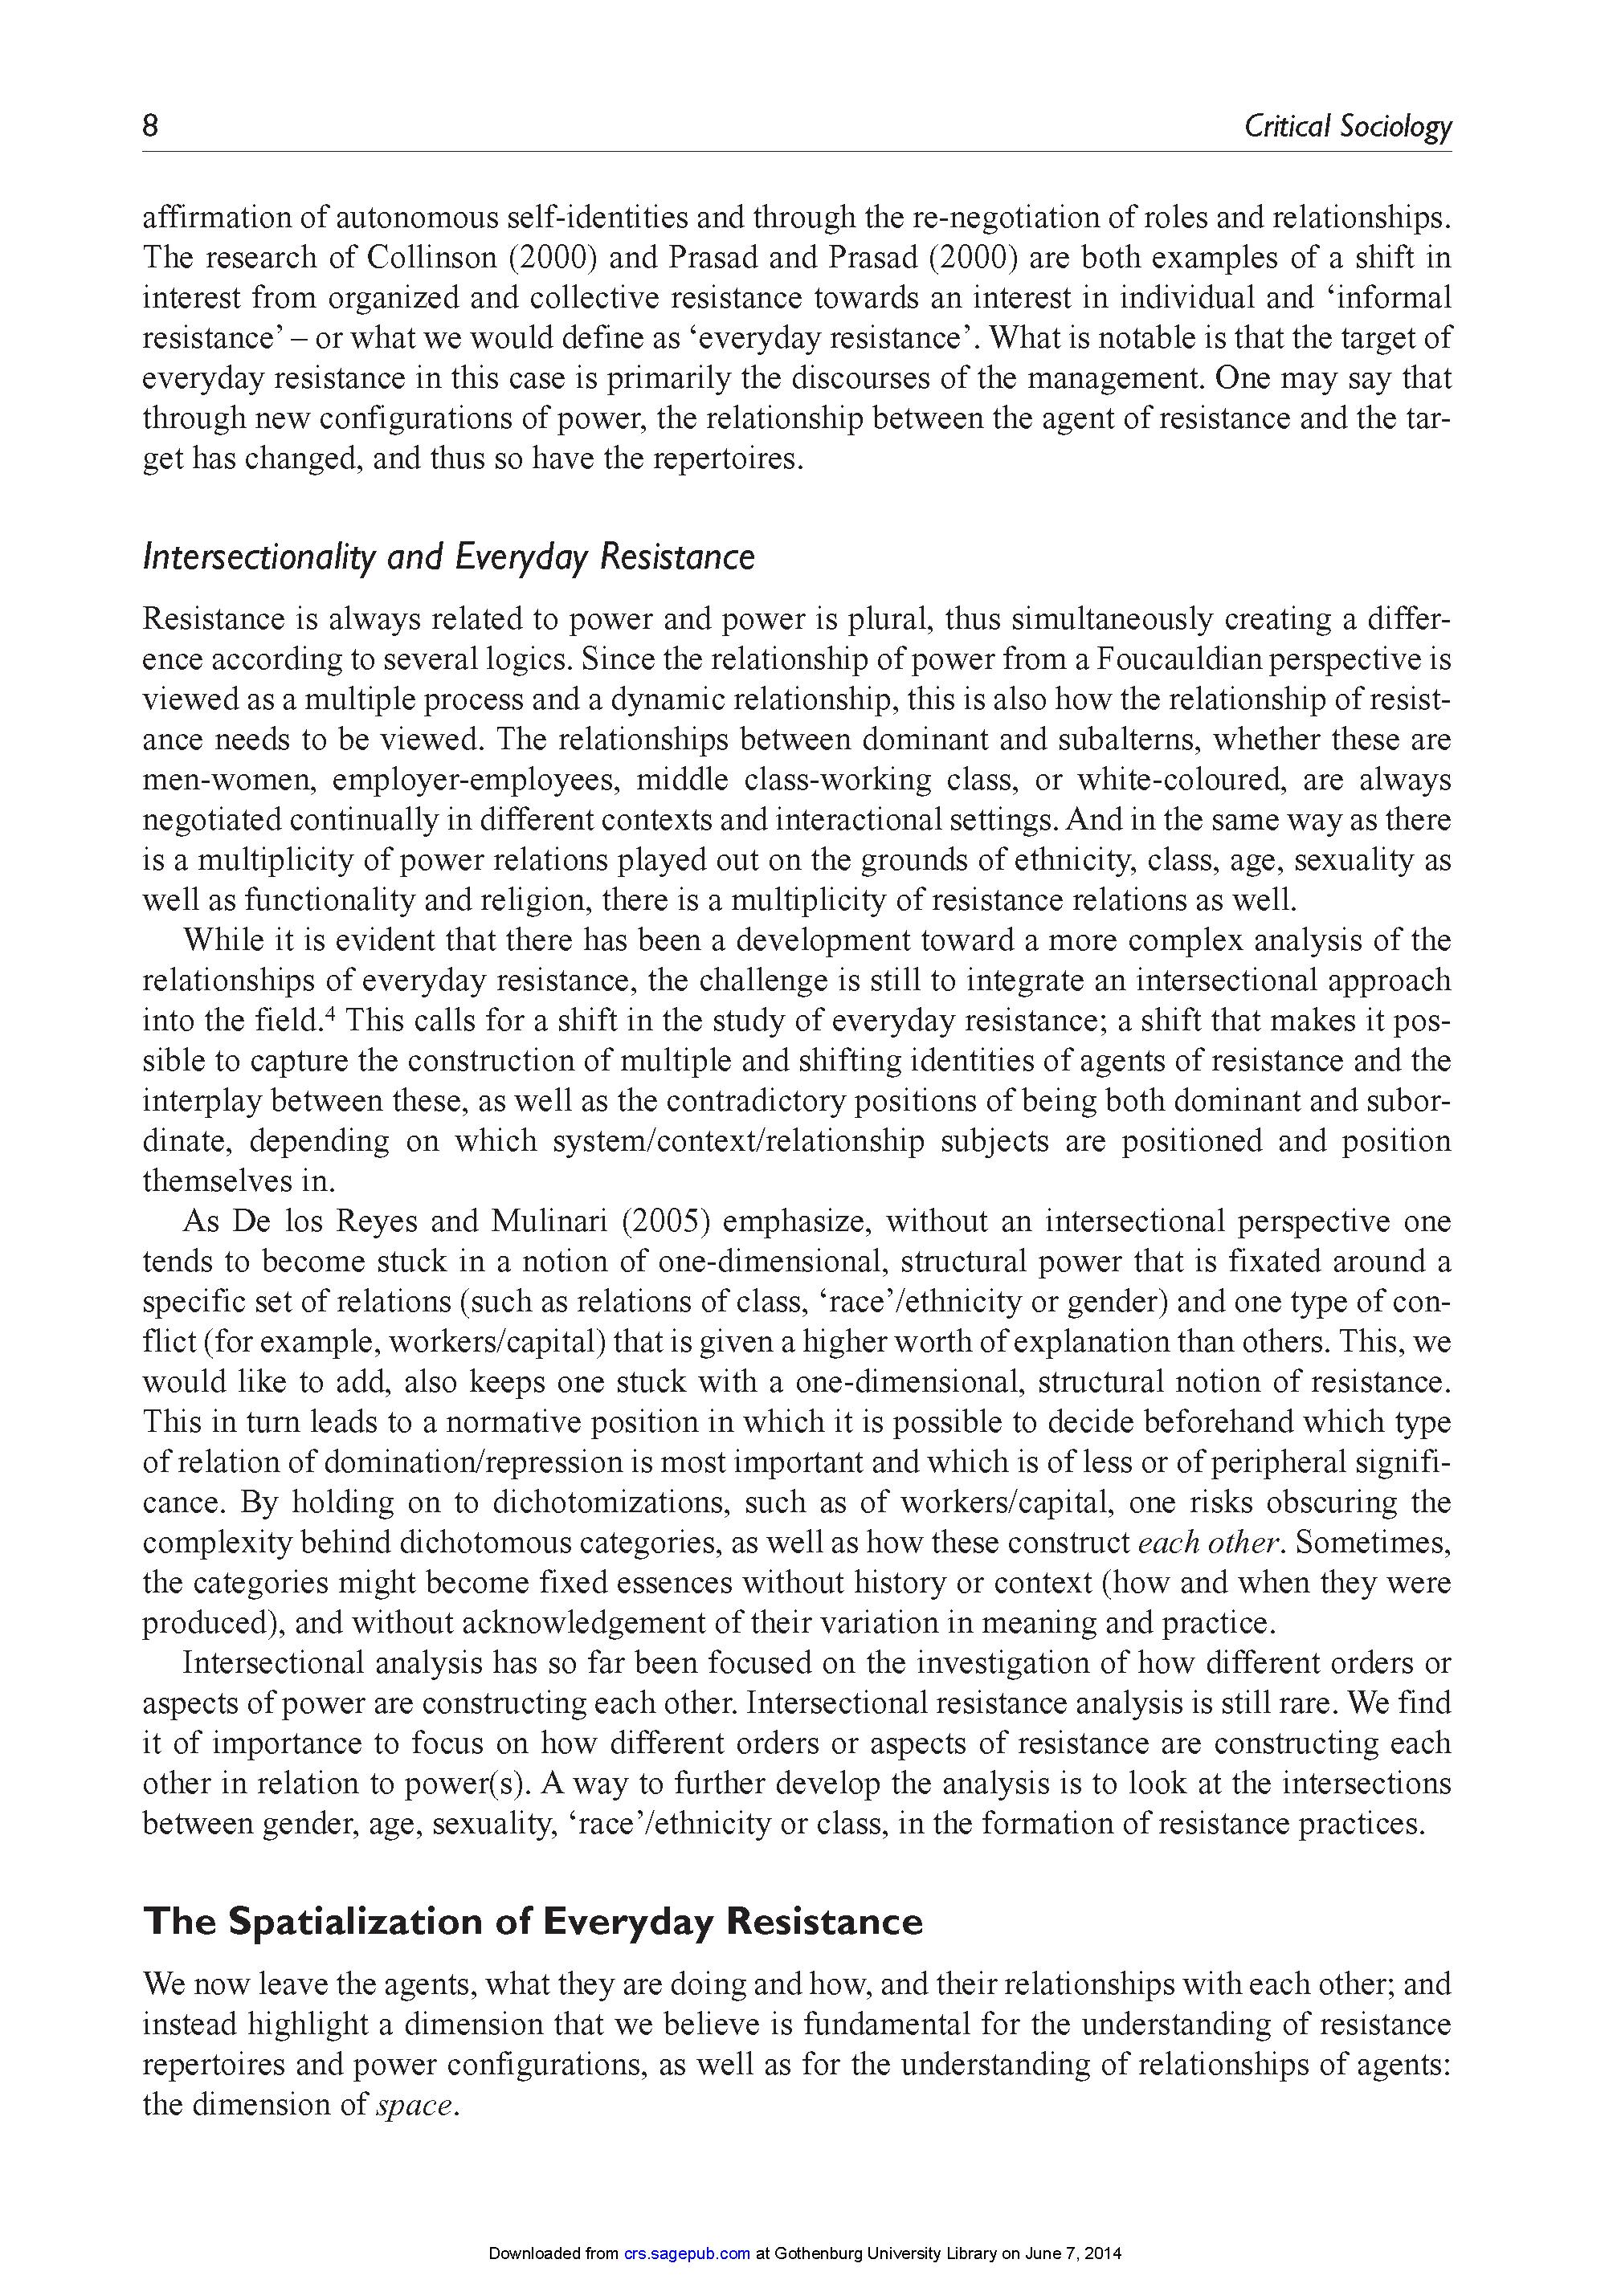 Dimensions of Everyday Resistance: An Analytical Framework